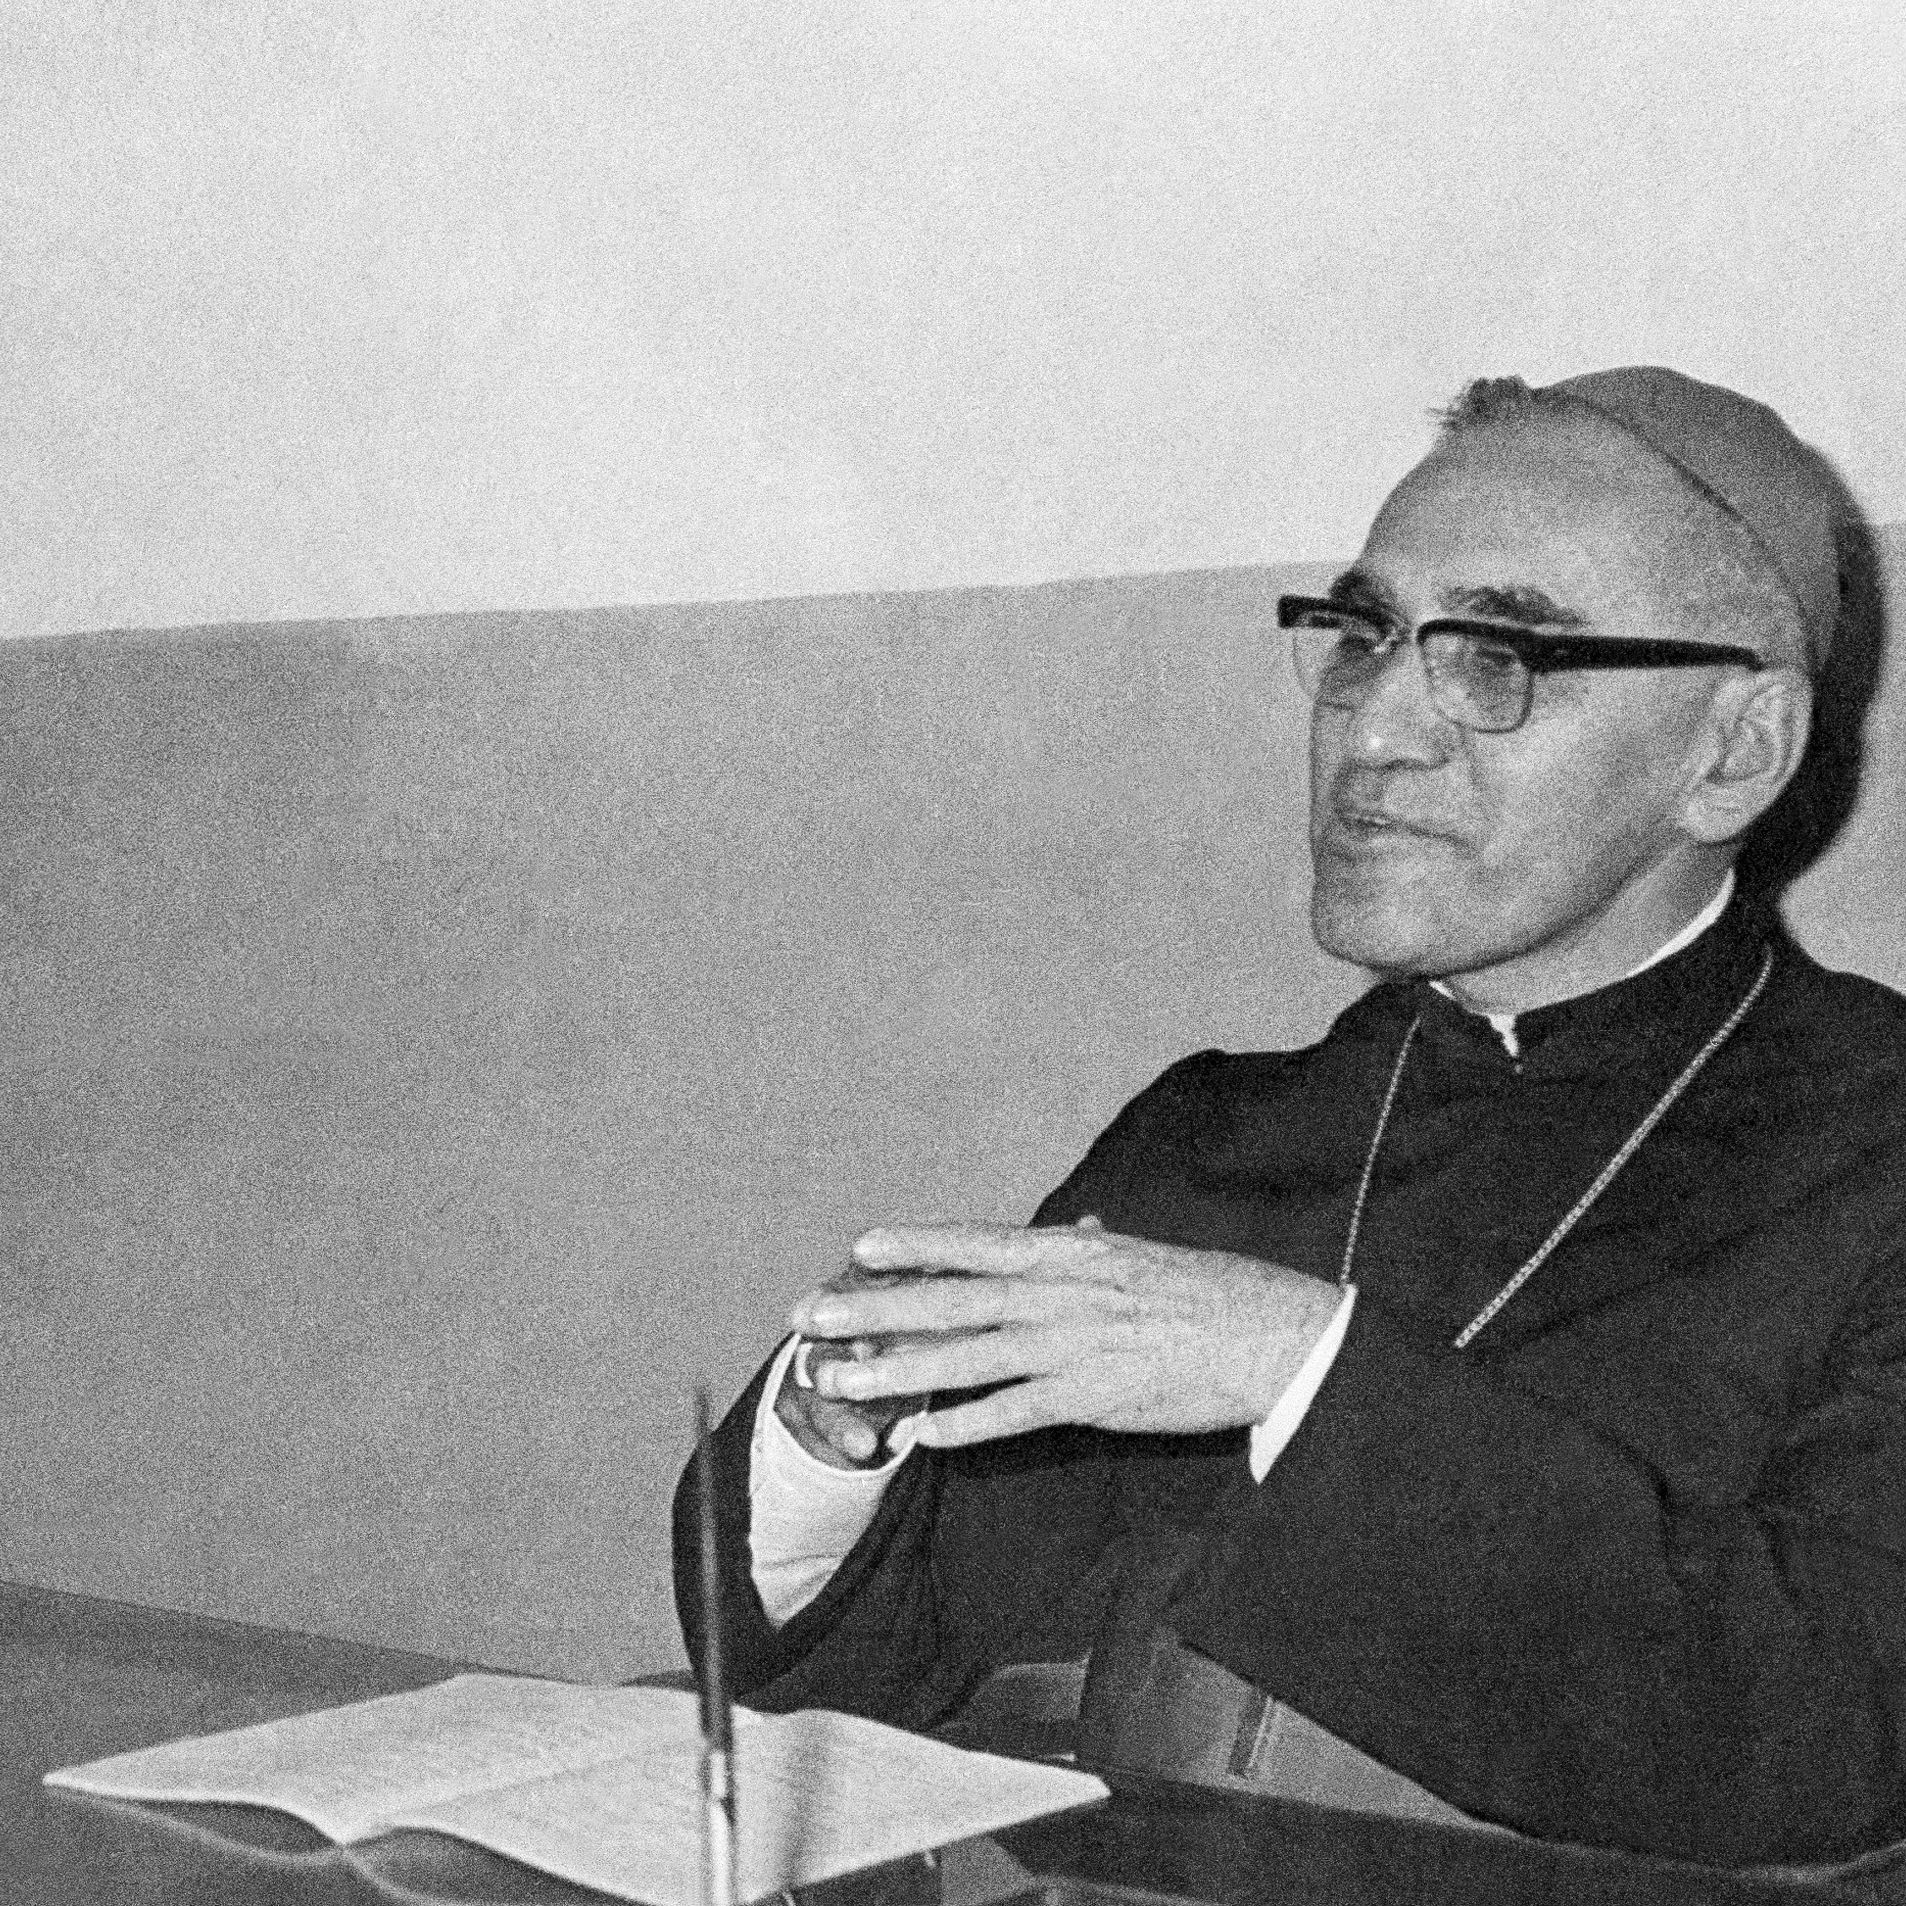 Romero should inspire us to fight slavery, says Bishop Lynch